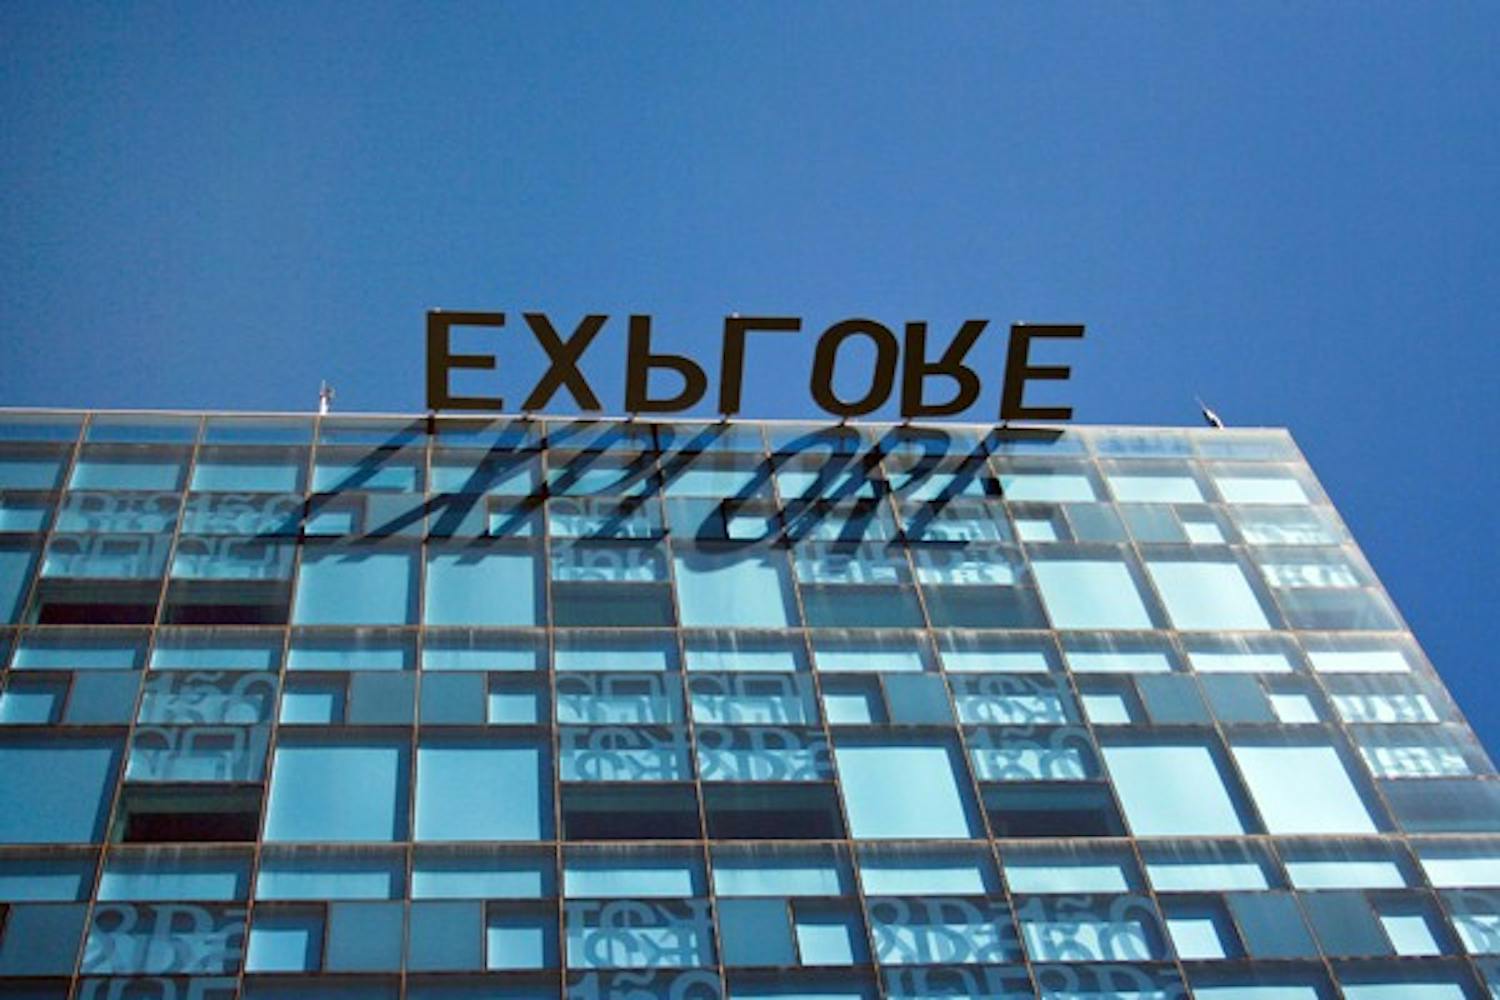 HERE COMES THE SUN: The sky is much more clear on Tuesday afternoon after Monday's rainstorm has dissappated. The sun shines bright once again and the explore sign casts a shadow on Lattie F. Coor building on the Tempe campus. (Photo by Lisa Bartoli)